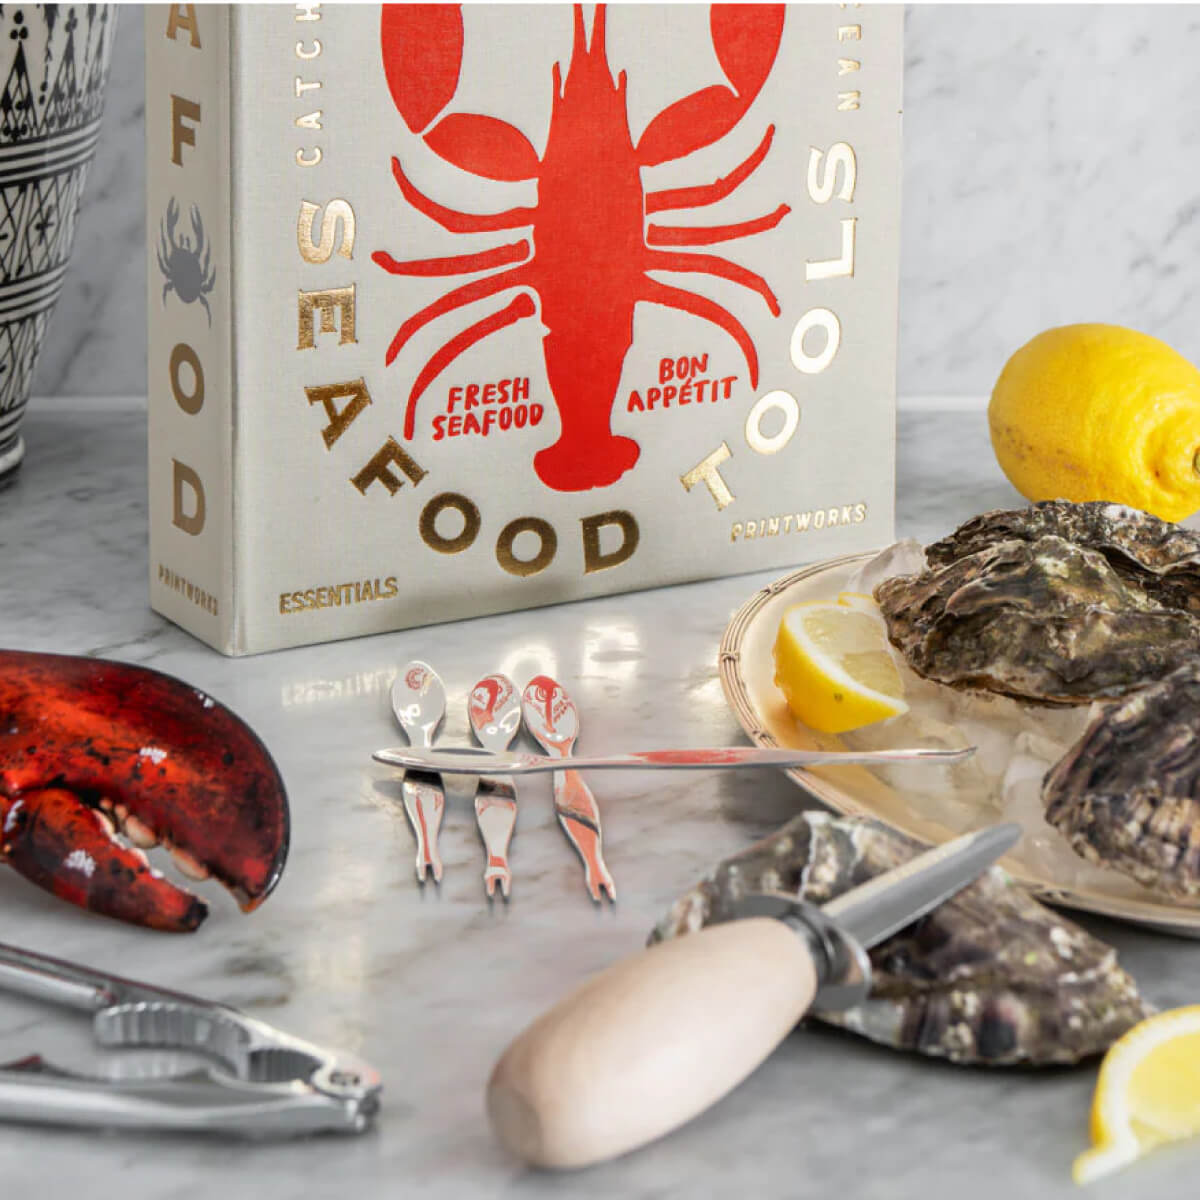 The Essentials Seafood Tools front | MILK MONEY milkmoney.co | white elephant gift ideas, gift, mother's day gift ideas, white elephant gift, gift shops near me